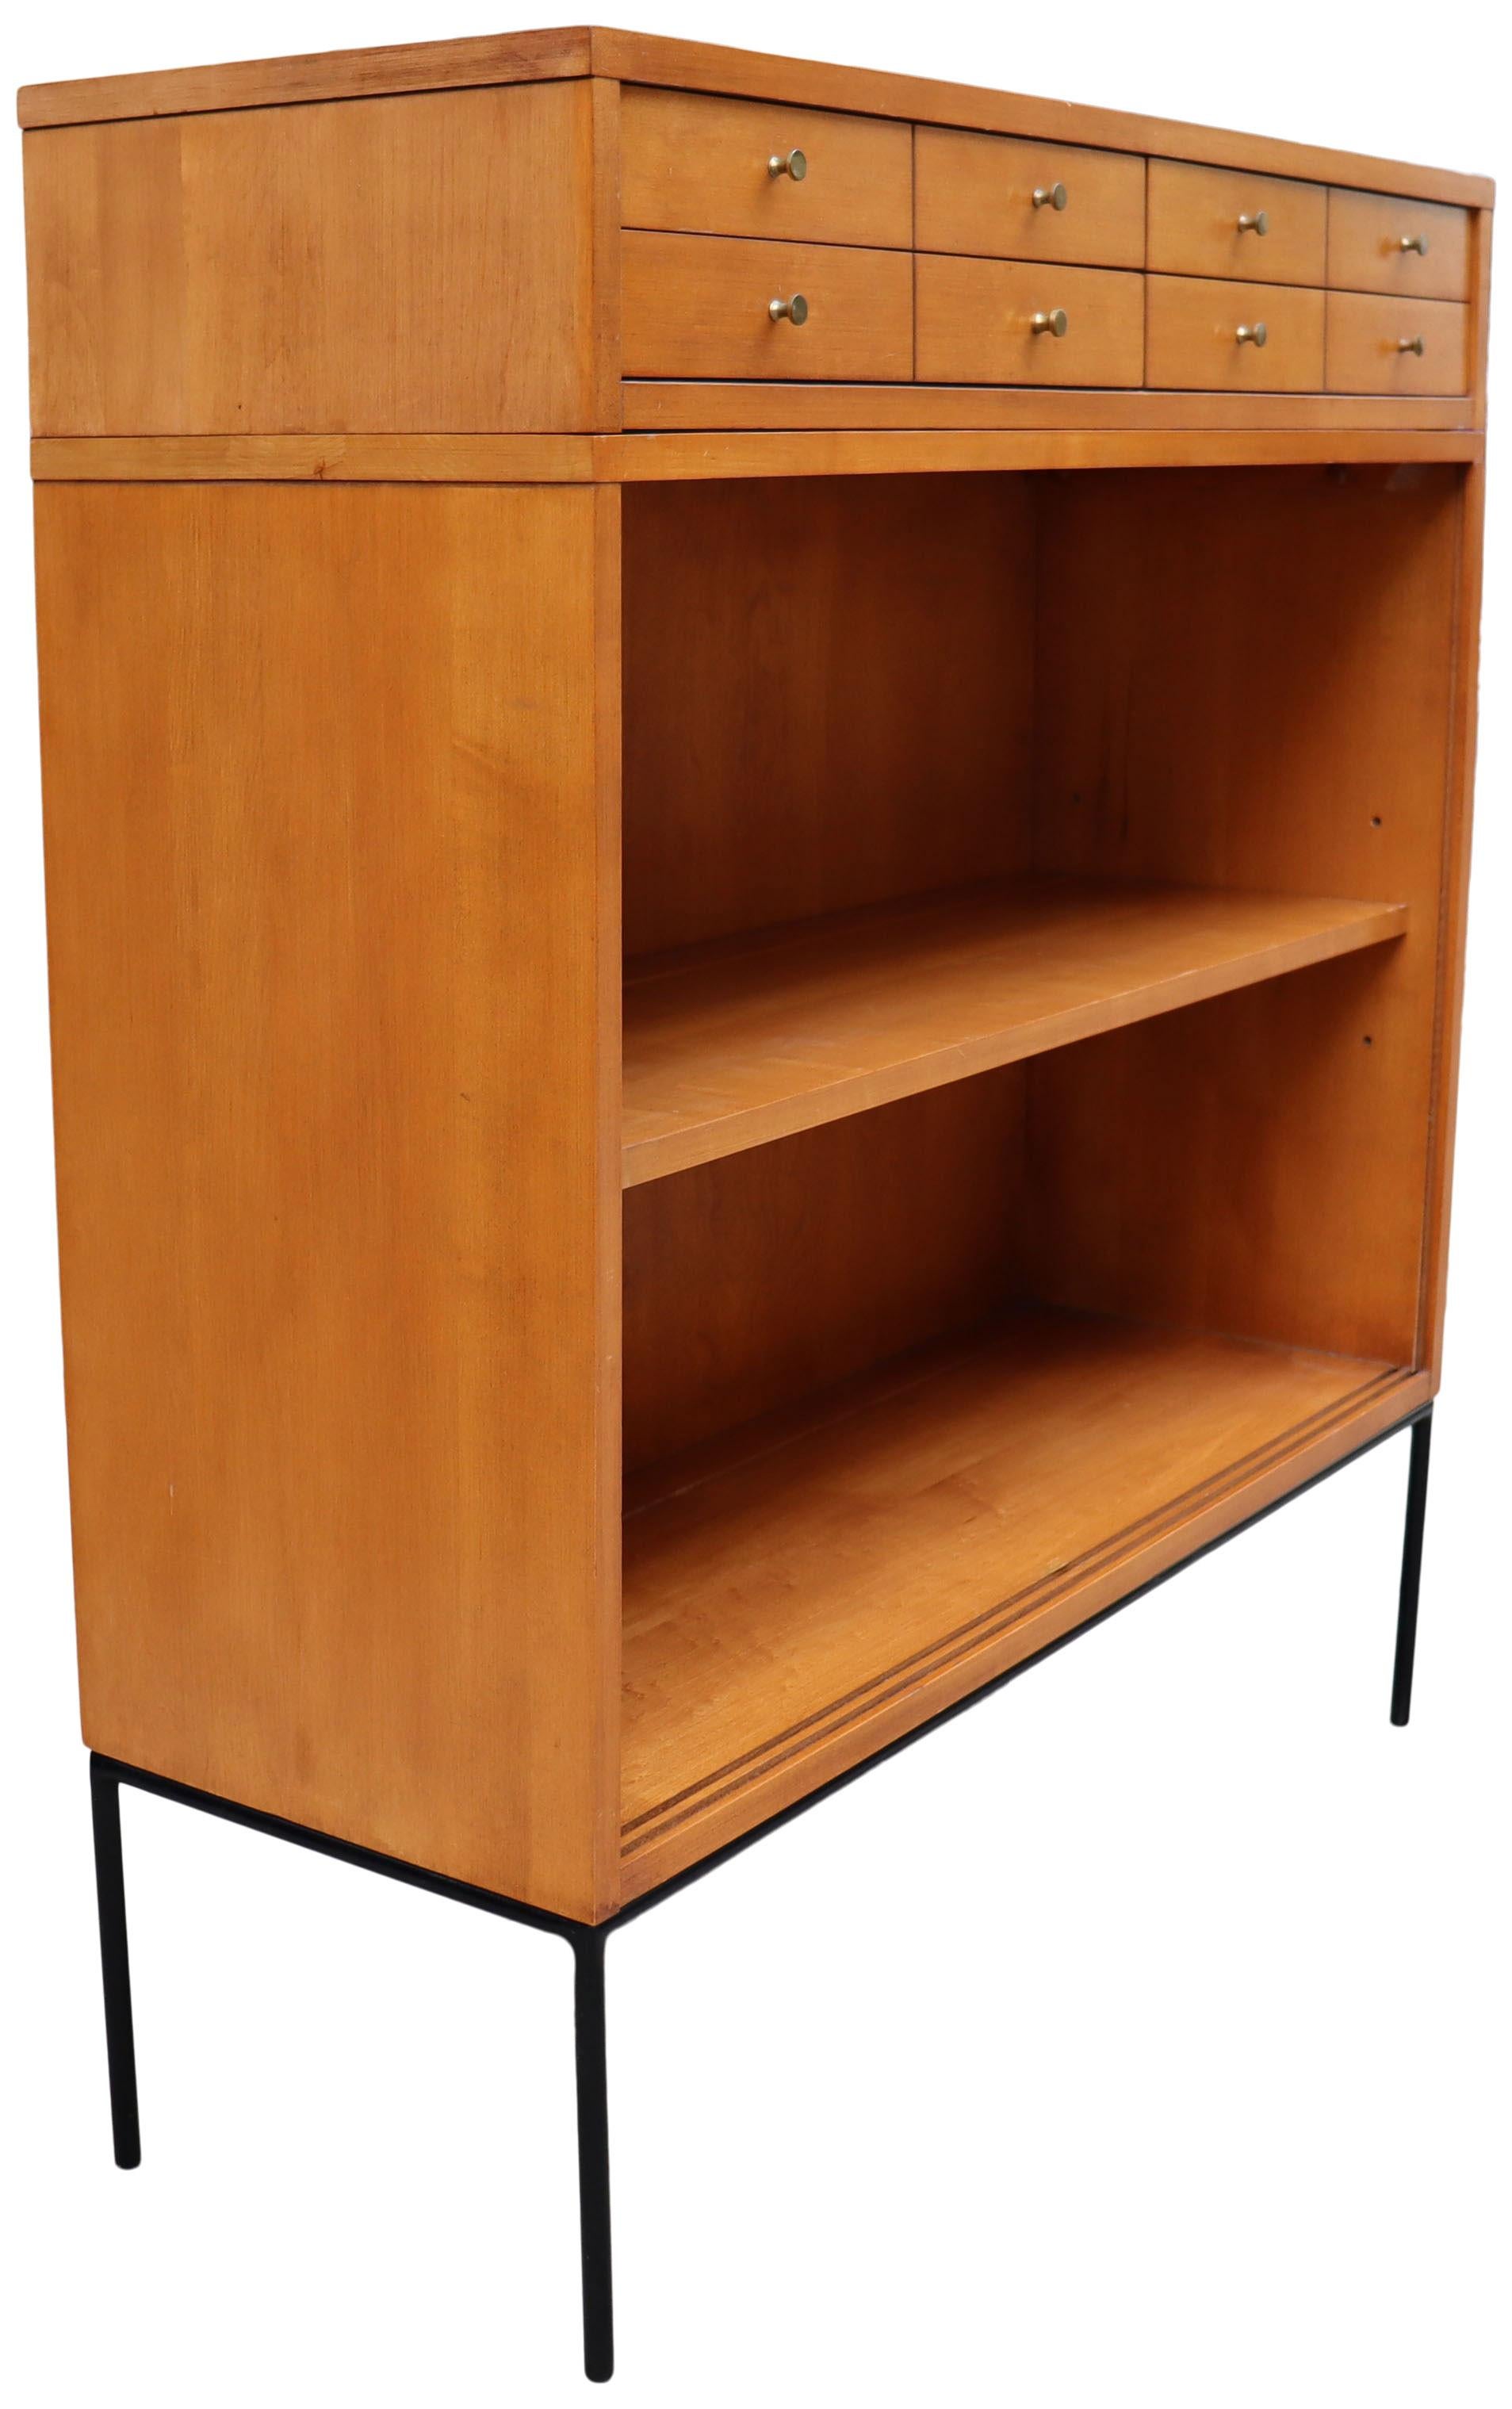 20th Century Midcentury Paul McCobb Single Bookcase with Jewelry Cabinet